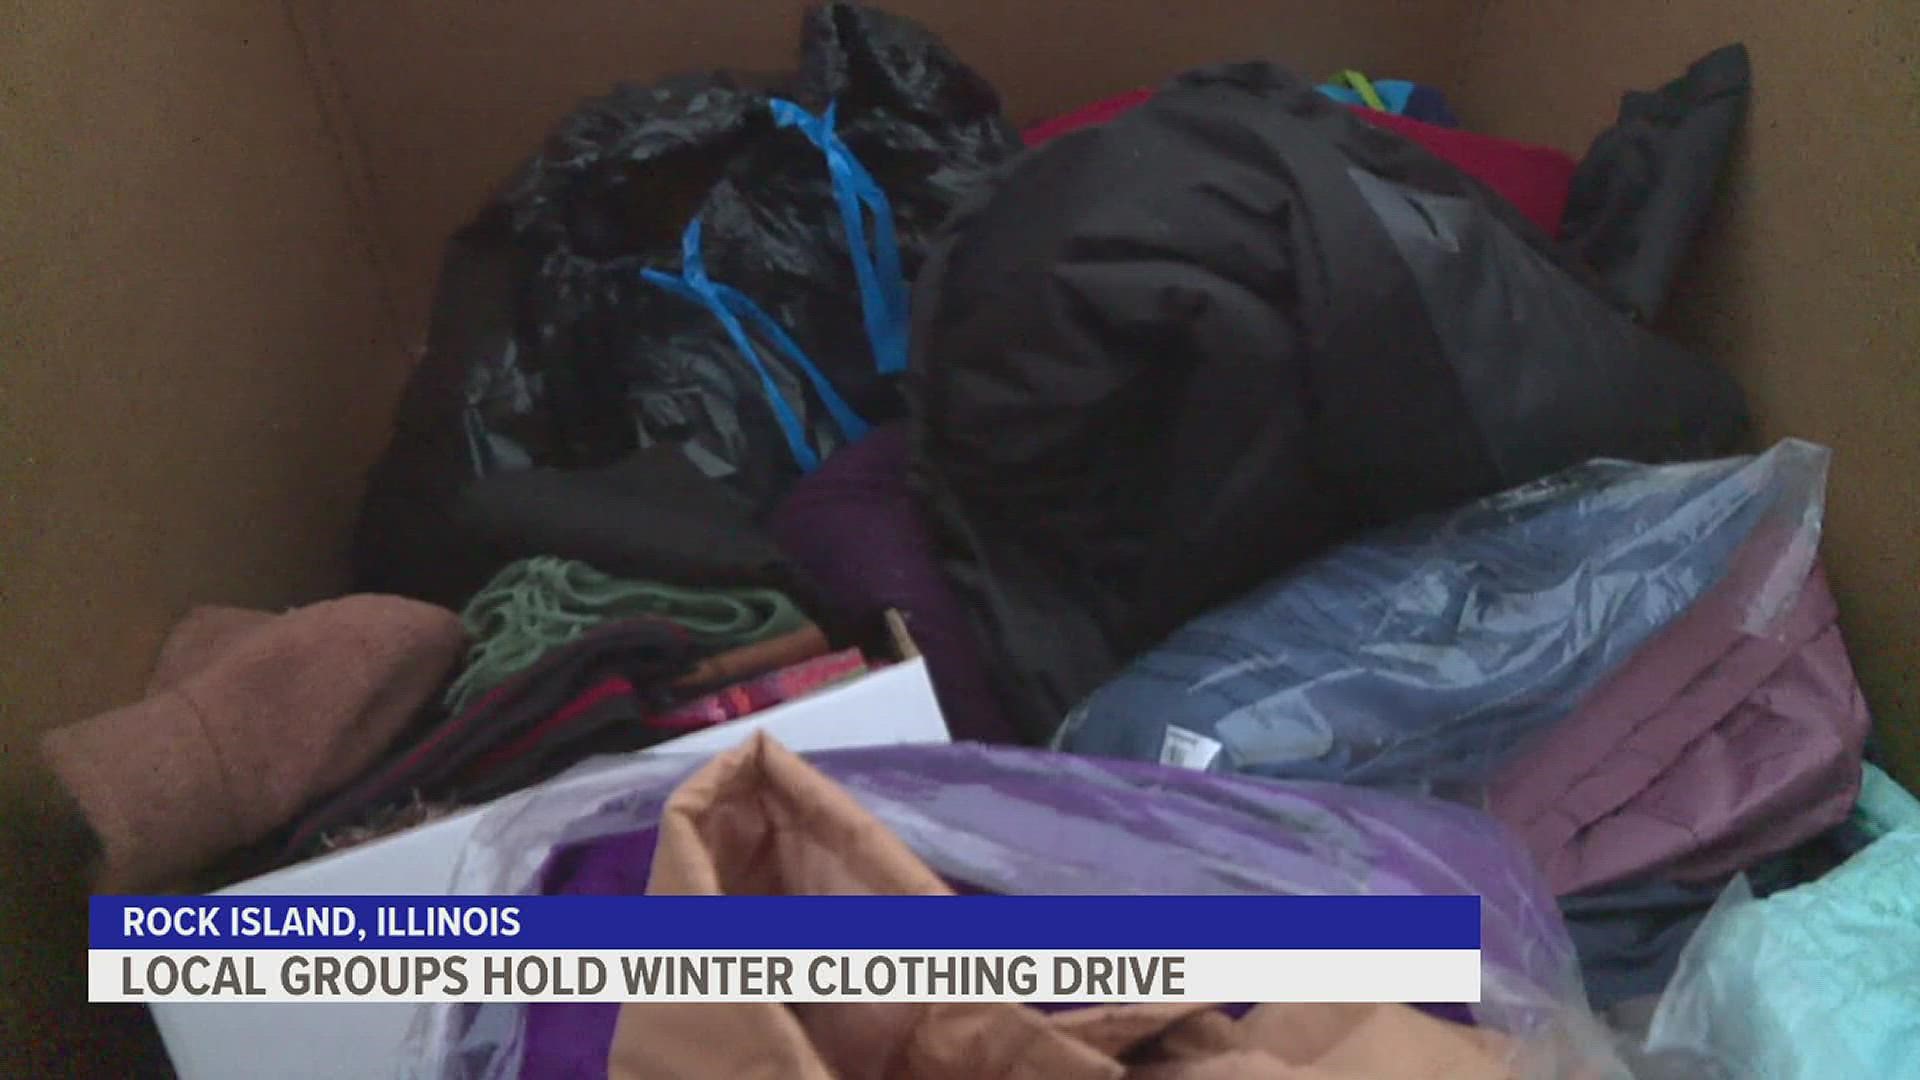 Modern Woodmen Financial & S.A.L. Community Services teamed up, to make sure people in need get warm clothing.